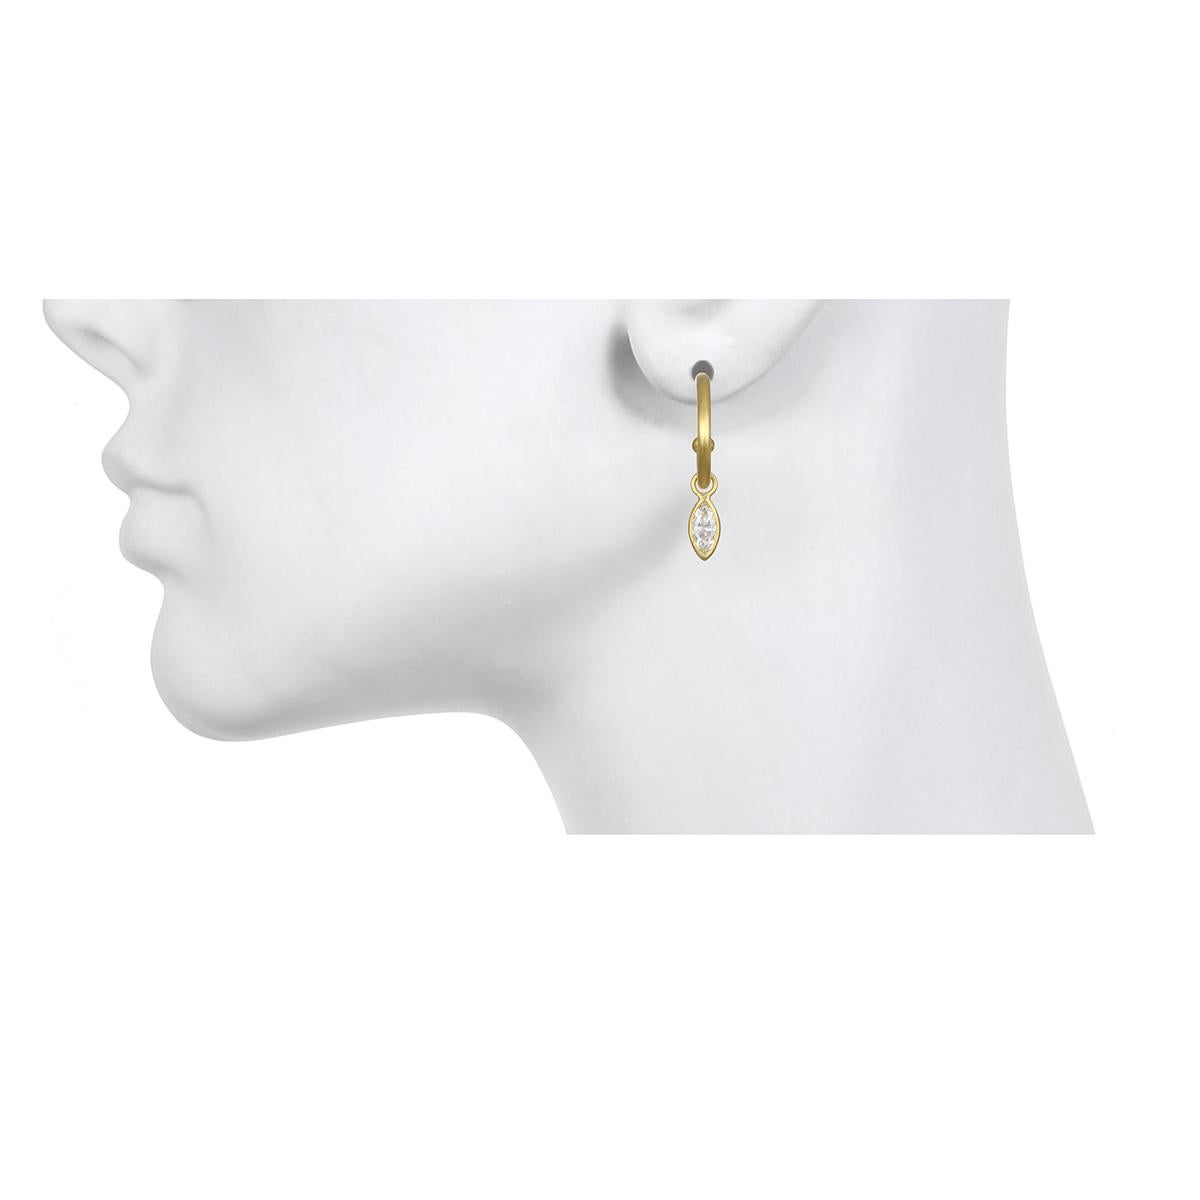 A perennial favorite. Faye's  18k gold post hoops sparkle with interchangeable bezel set Marquise diamond drops. Just the right amount of dazzle for the modern woman. Comfortable and transition from day to evening seamlessly. 

Earrings as